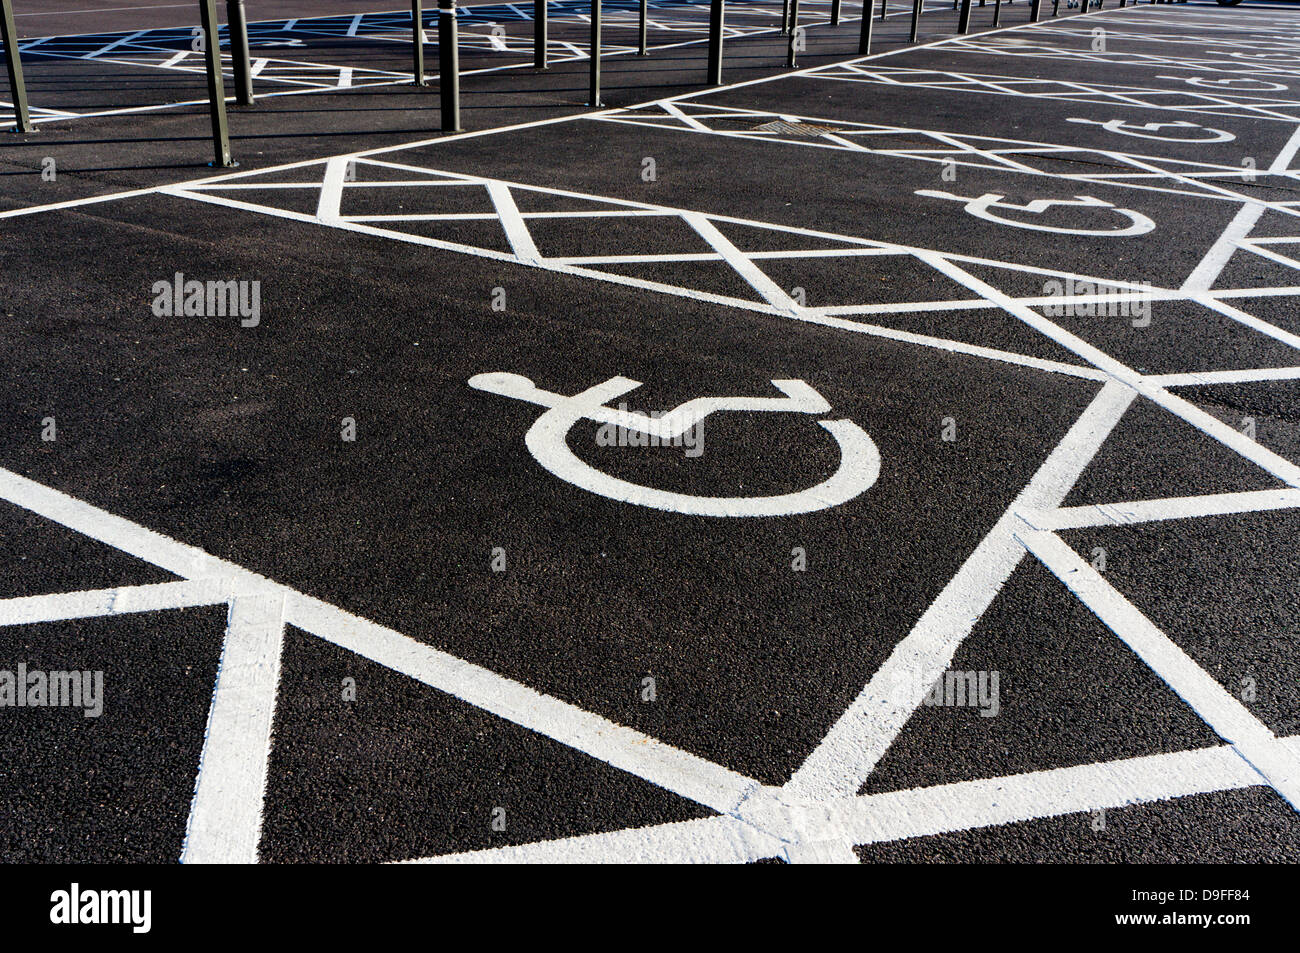 Disabled parking spaces in a supermarket car park. Stock Photo